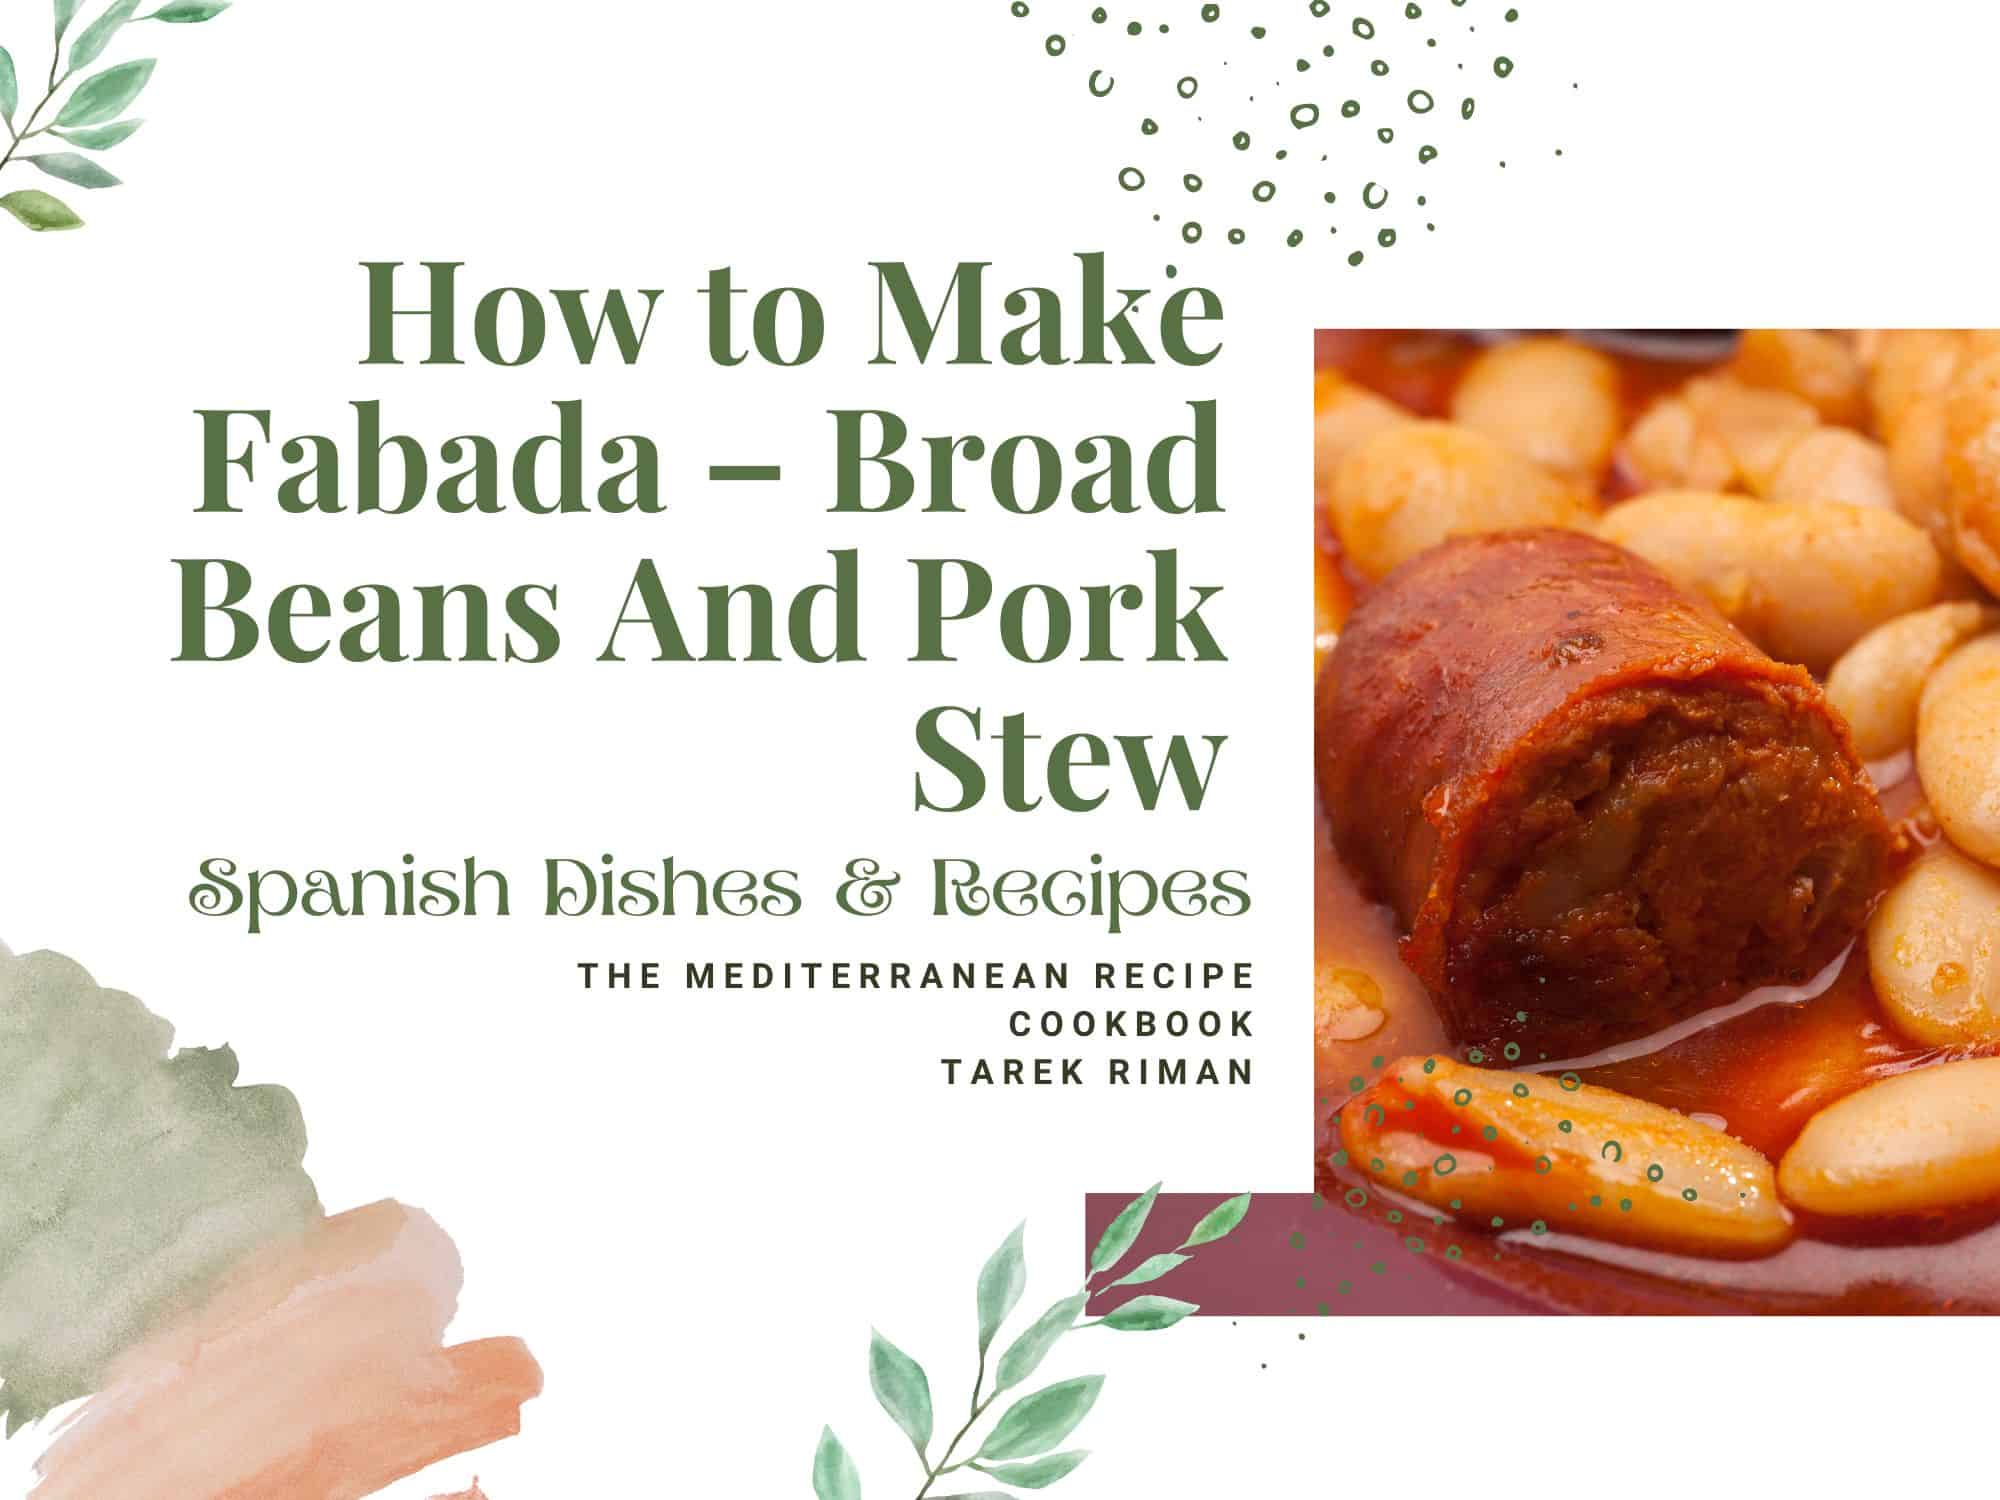 How to Make Fabada – Broad Beans And Pork Stew